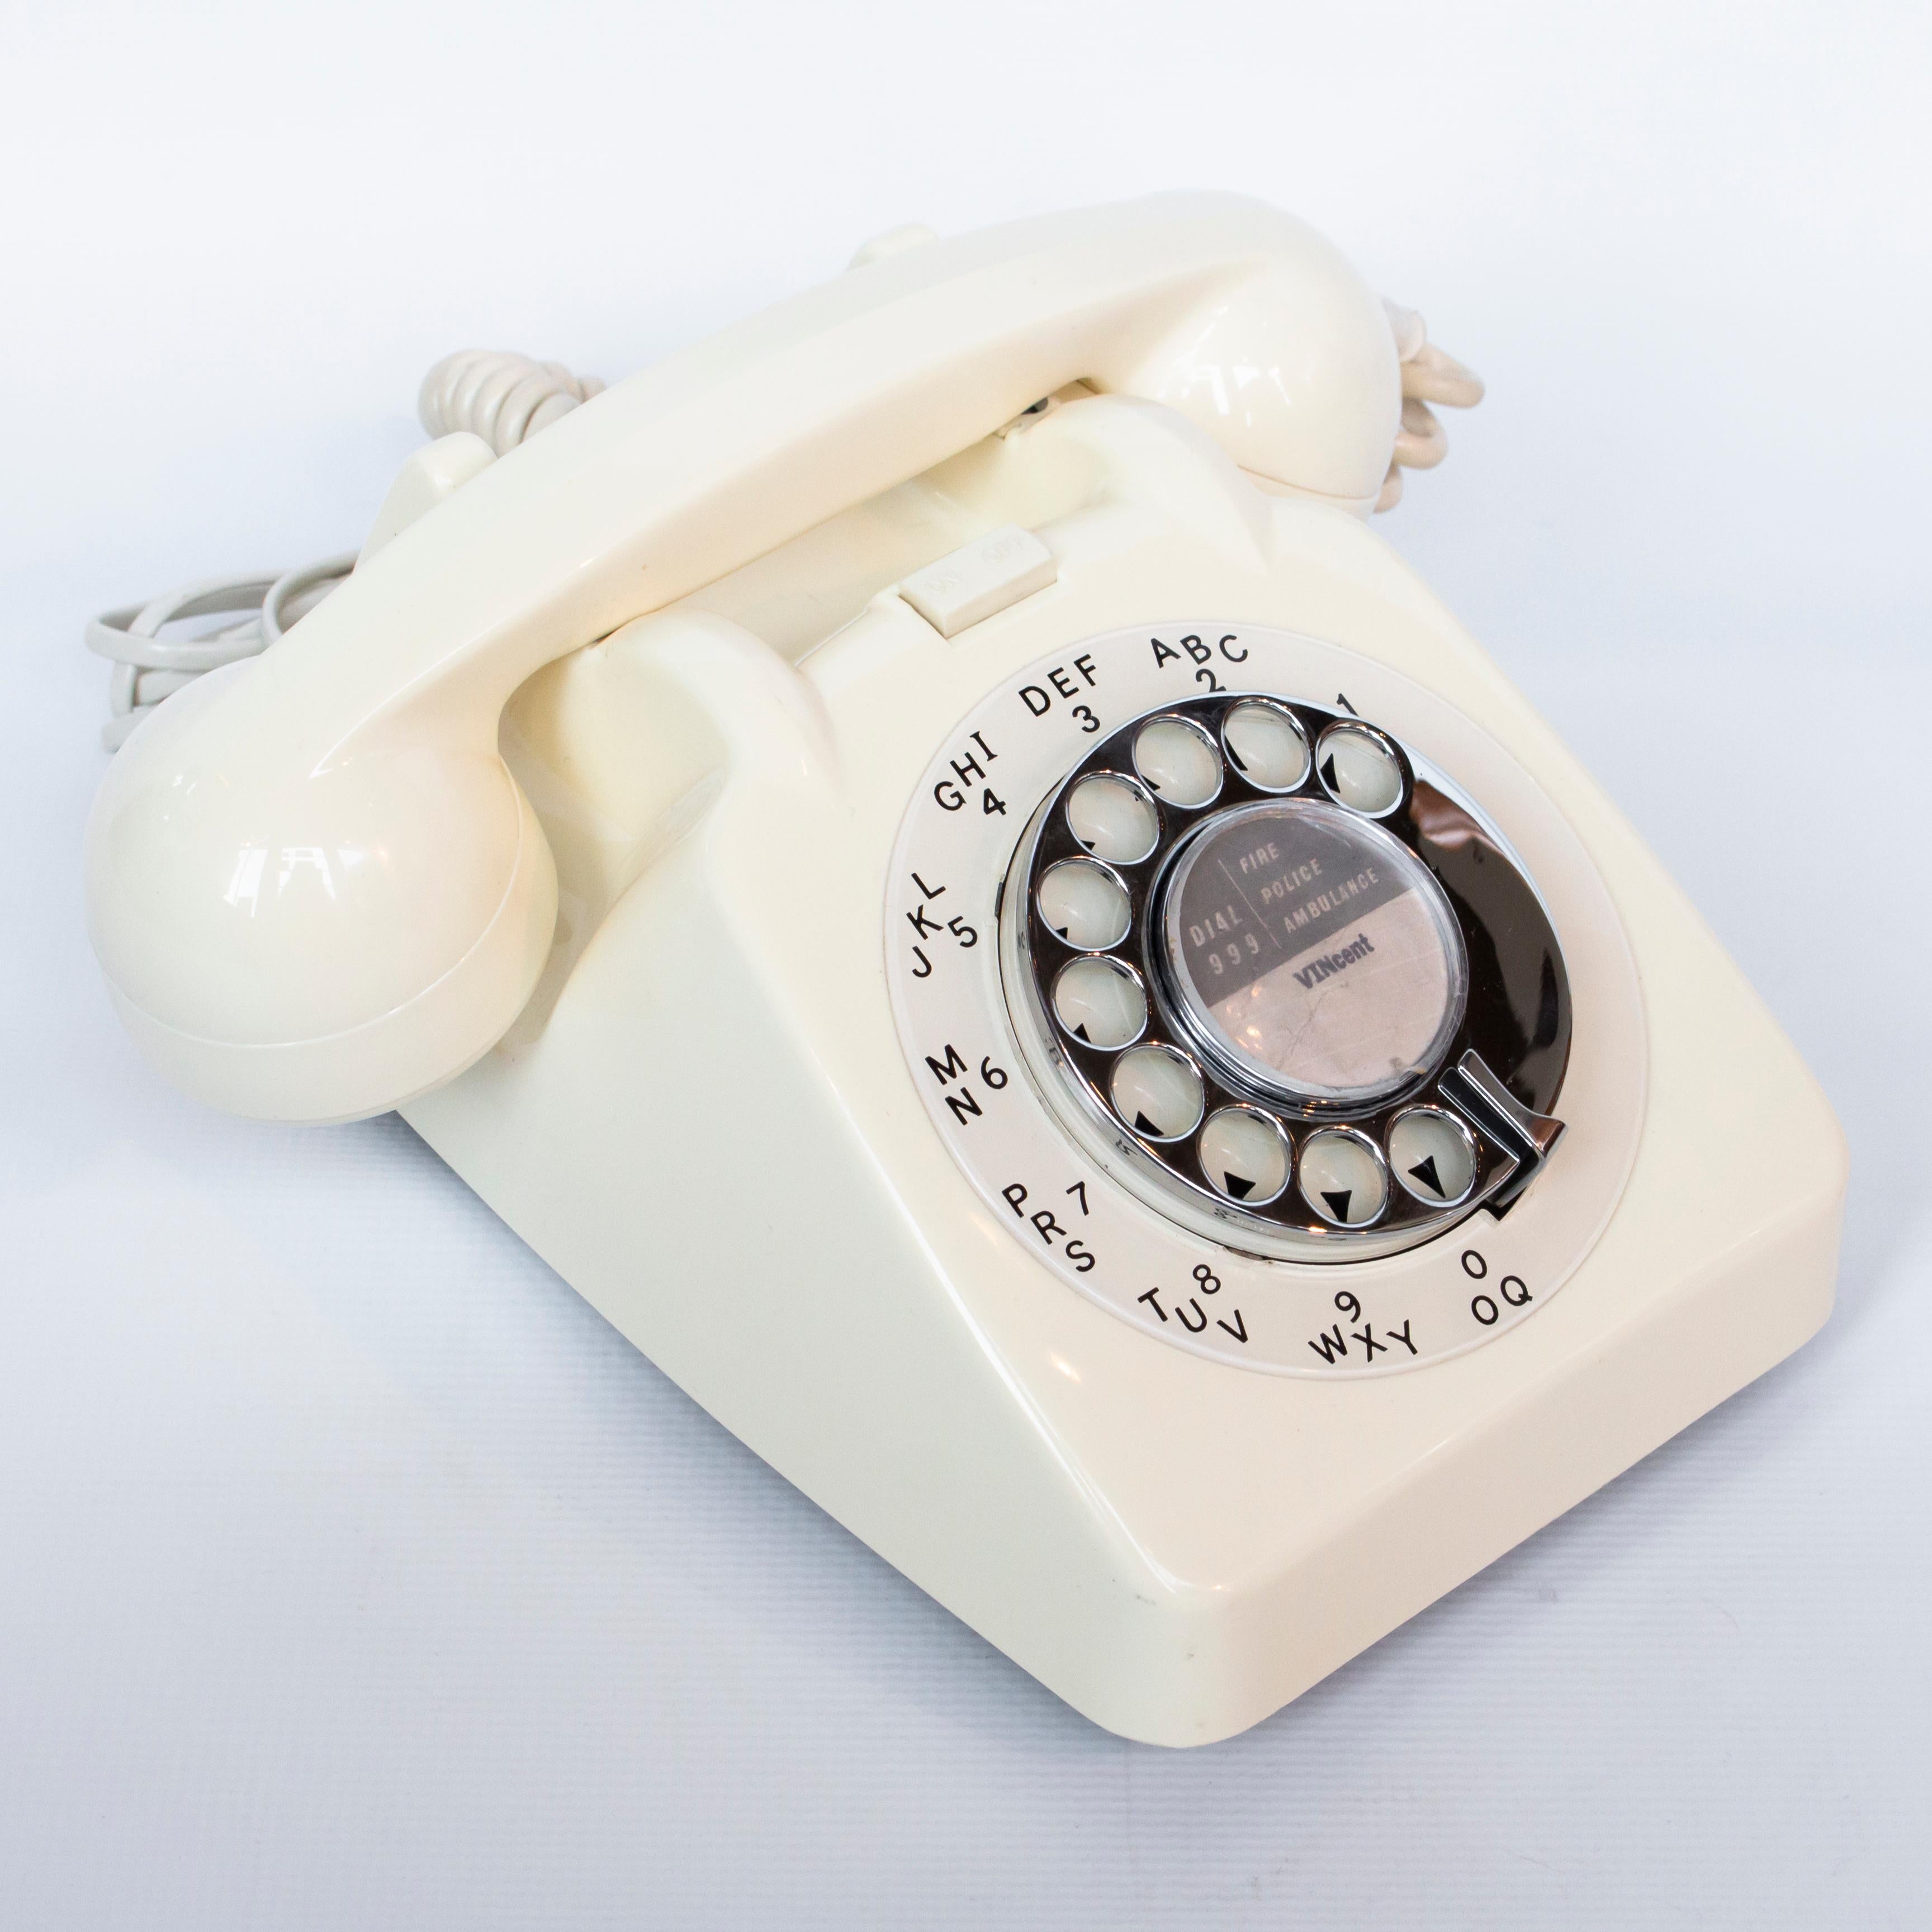 English Original 1961 GPO Model 706 Telephone in Ivory, On/Off Bell Feature